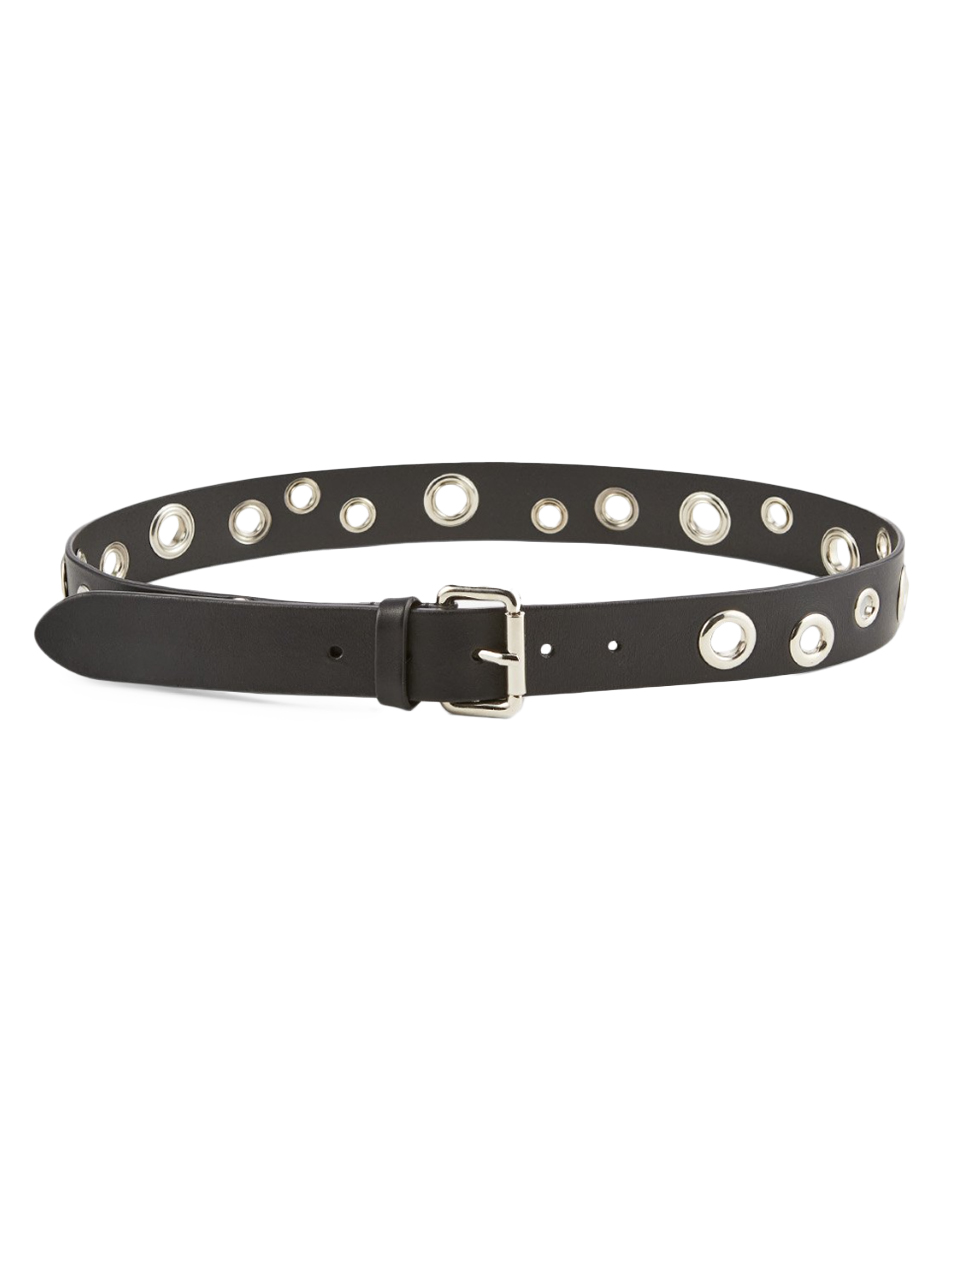 OTTOD'AME Eyelet Studded Belt in Black Front View 